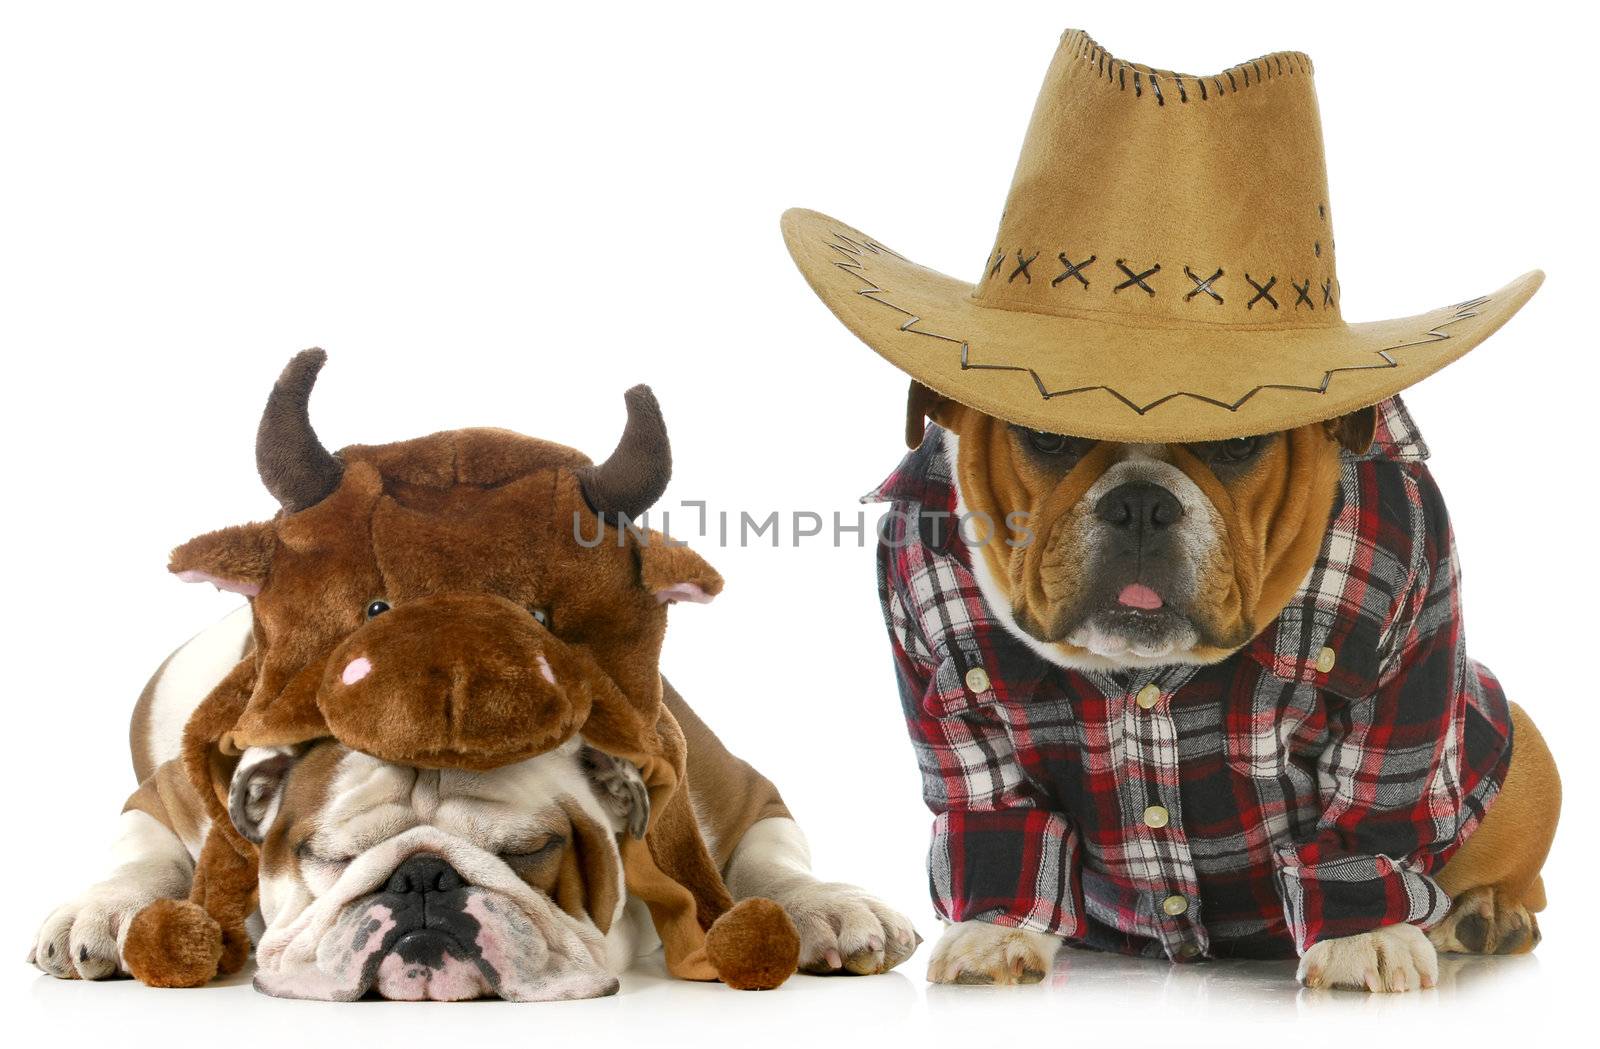 country dog - english bulldog dressed up like a farmer and a bull isolated on white background 